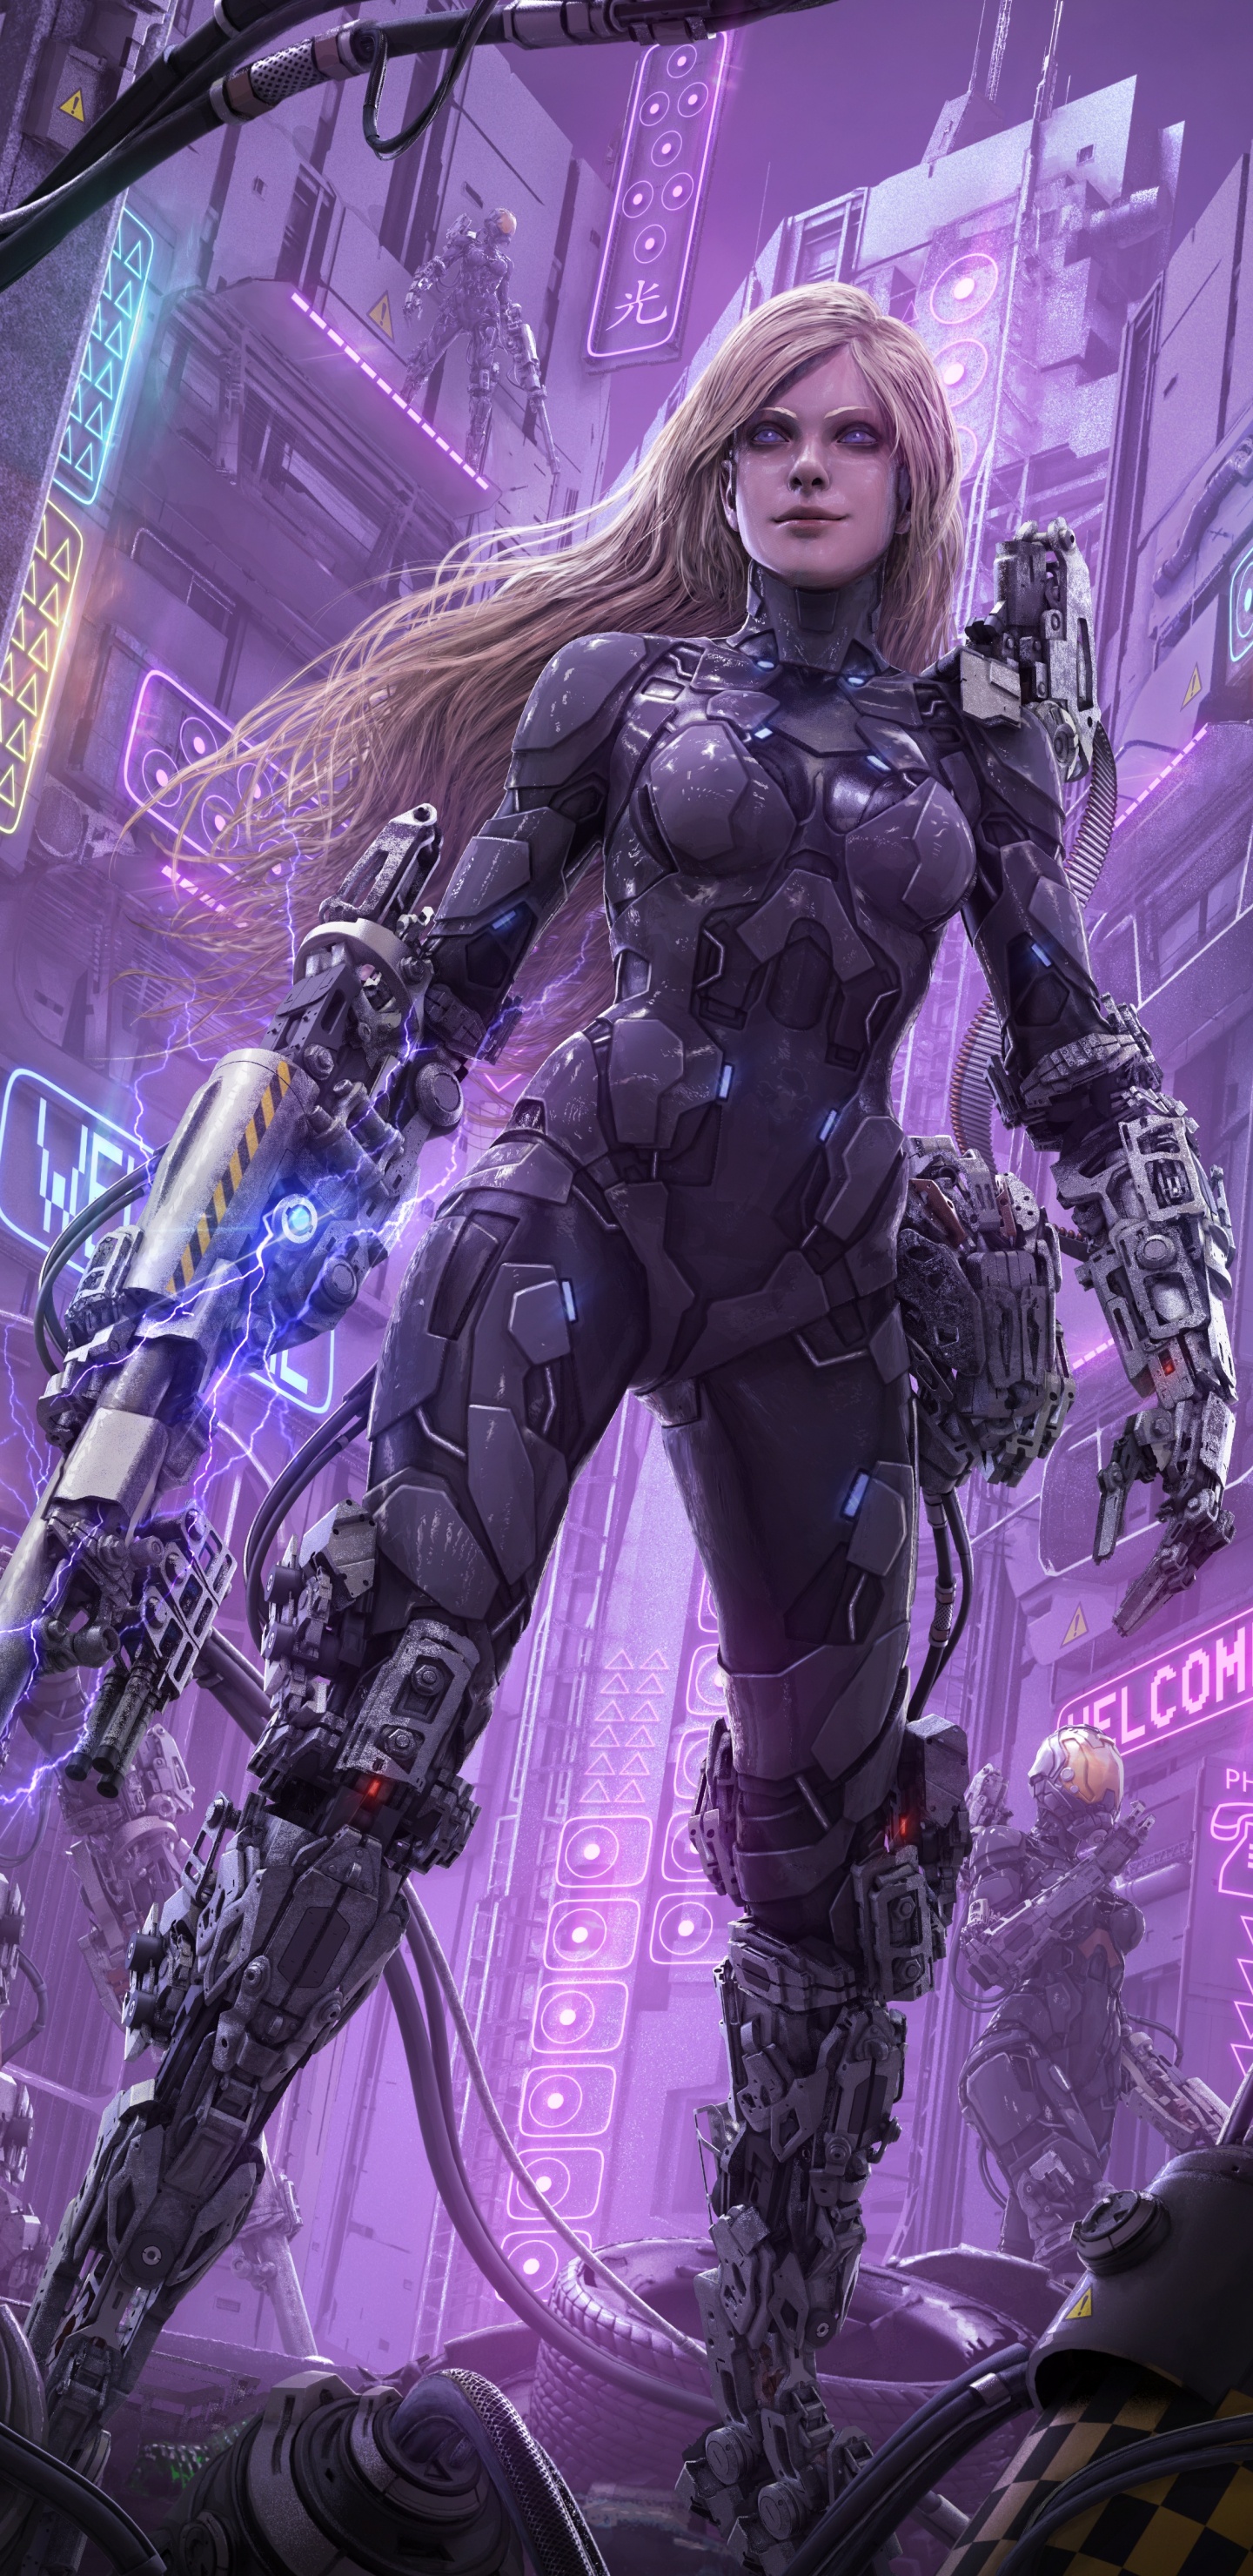 Cyberpunk, Science Fiction, Purple, pc Game, Games. Wallpaper in 1440x2960 Resolution